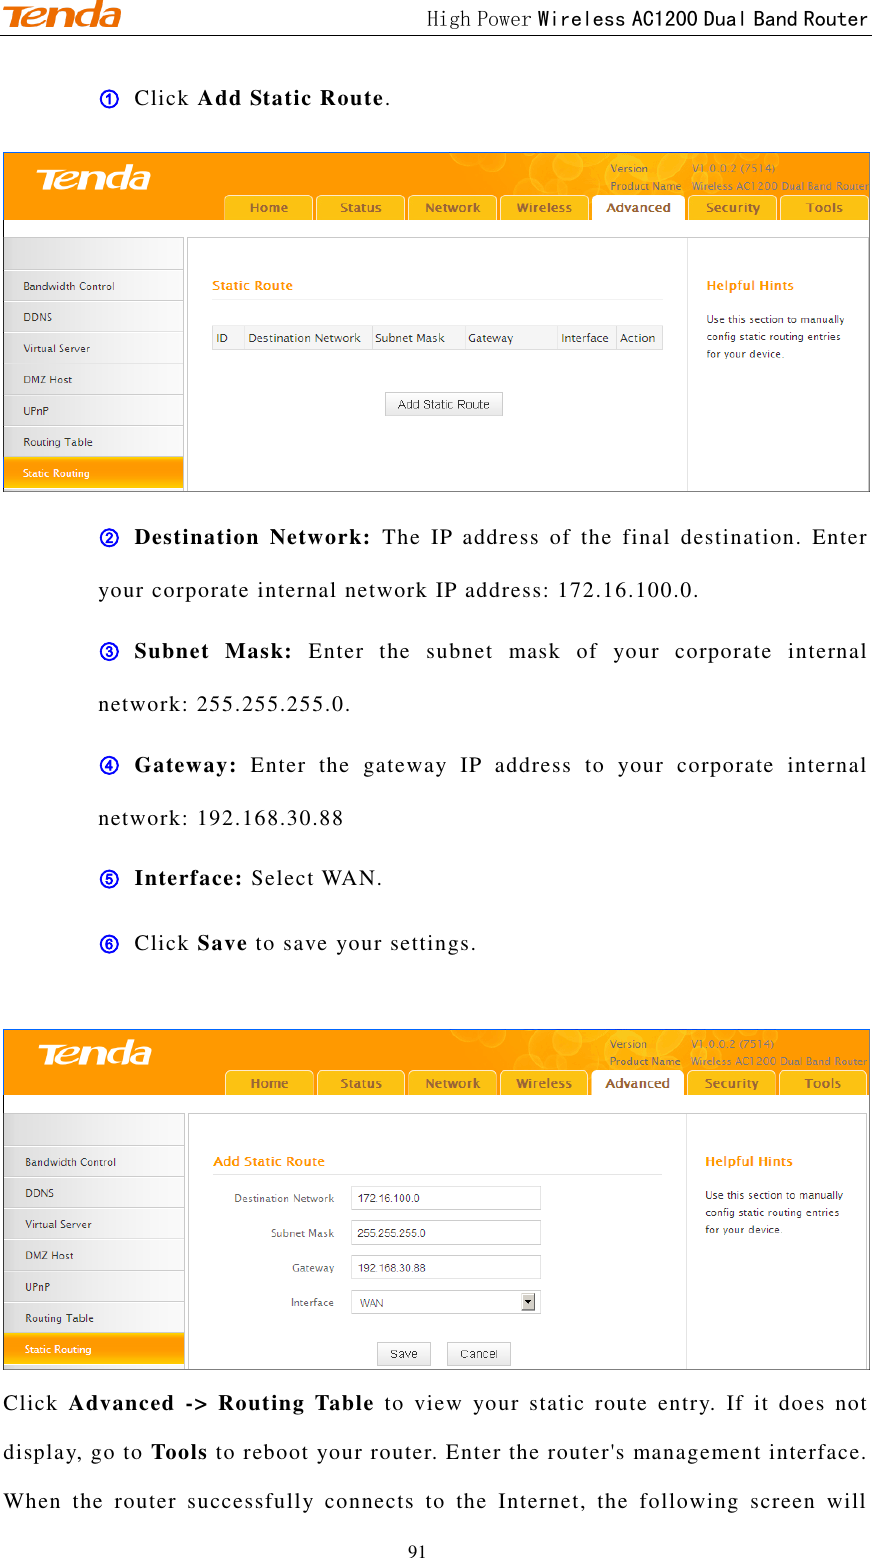                                             High Power Wireless AC1200 Dual Band Router 91 ① Click Add Static Route.  ② Destination  Network:  The  IP  address  of  the  final  destination.  Enter your corporate internal network IP address: 172.16.100.0. ③ Subnet  Mask:  Enter  the  subnet  mask  of  your  corporate  internal network: 255.255.255.0. ④ Gateway:  Enter  the  gateway  IP  address  to  your  corporate  internal network: 192.168.30.88 ⑤ Interface: Select WAN. ⑥ Click Save to save your settings.   Click  Advanced  -&gt;  Routing  Table  to  view  your  static  route  entry.  If  it  does  not display, go to Tools to reboot your router. Enter the router&apos;s management interface. When  the  router  successfully  connects  to  the  Internet,  the  following  screen  will 